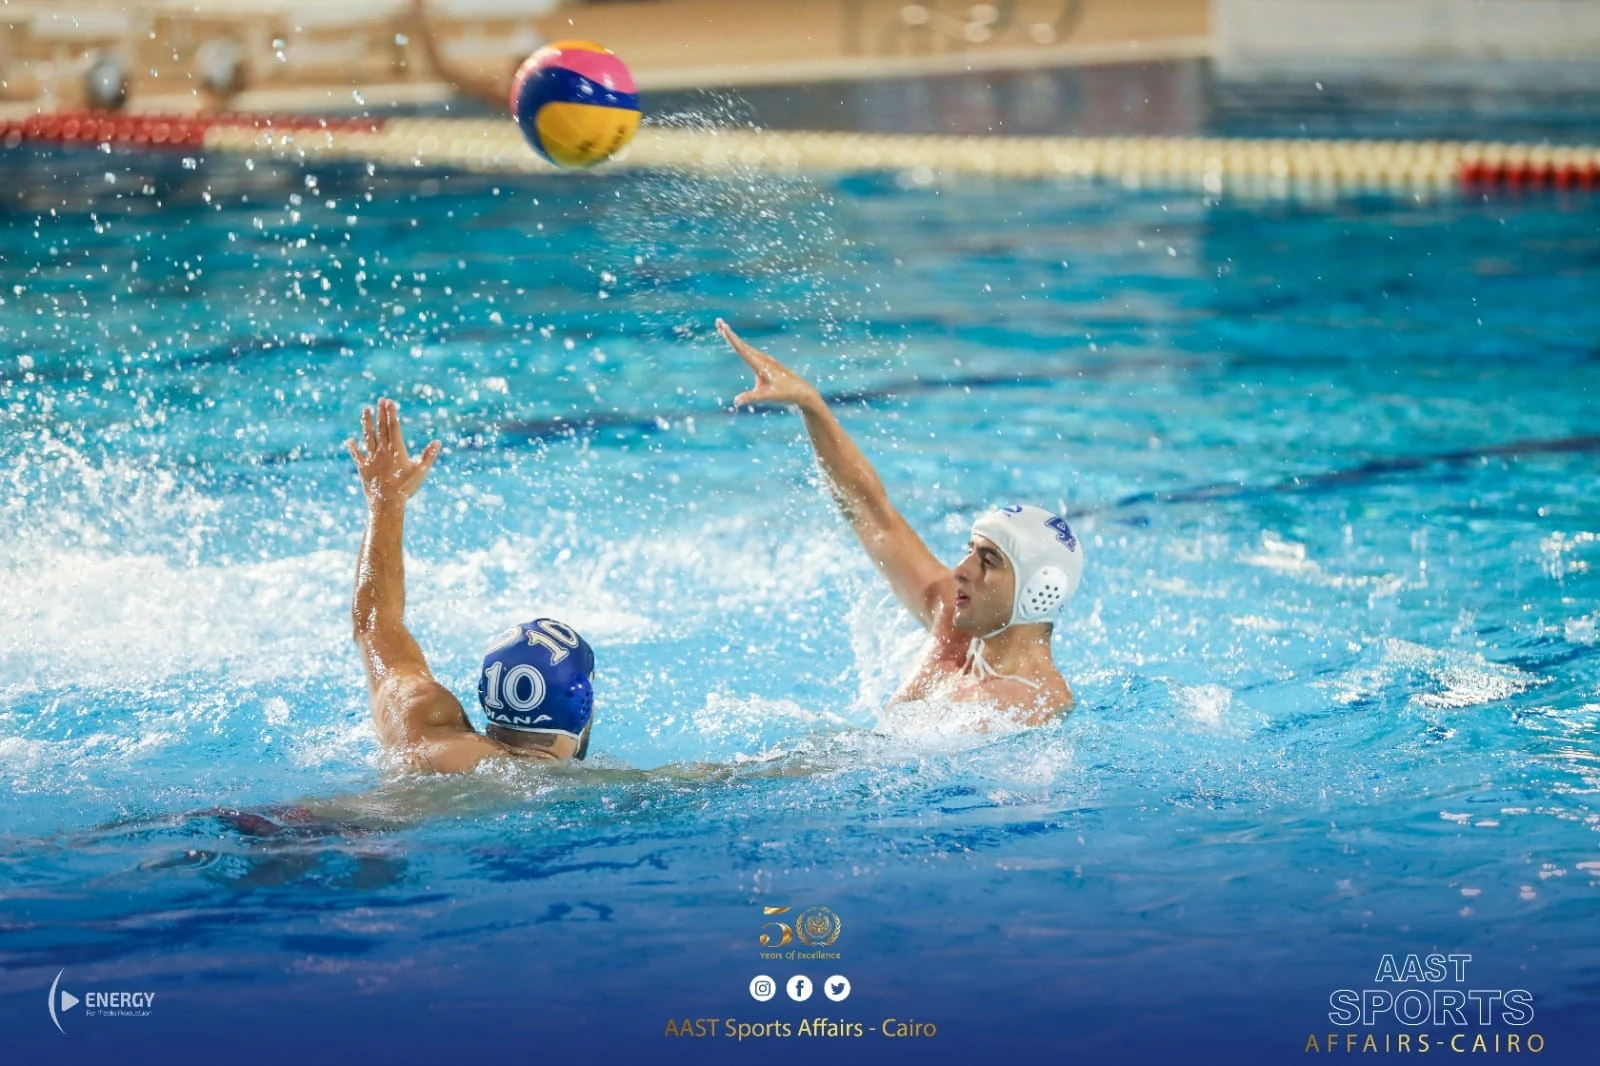 The Academy's water polo team in Cairo wins silver in the championship of private universities held at the American University in Cairo.2